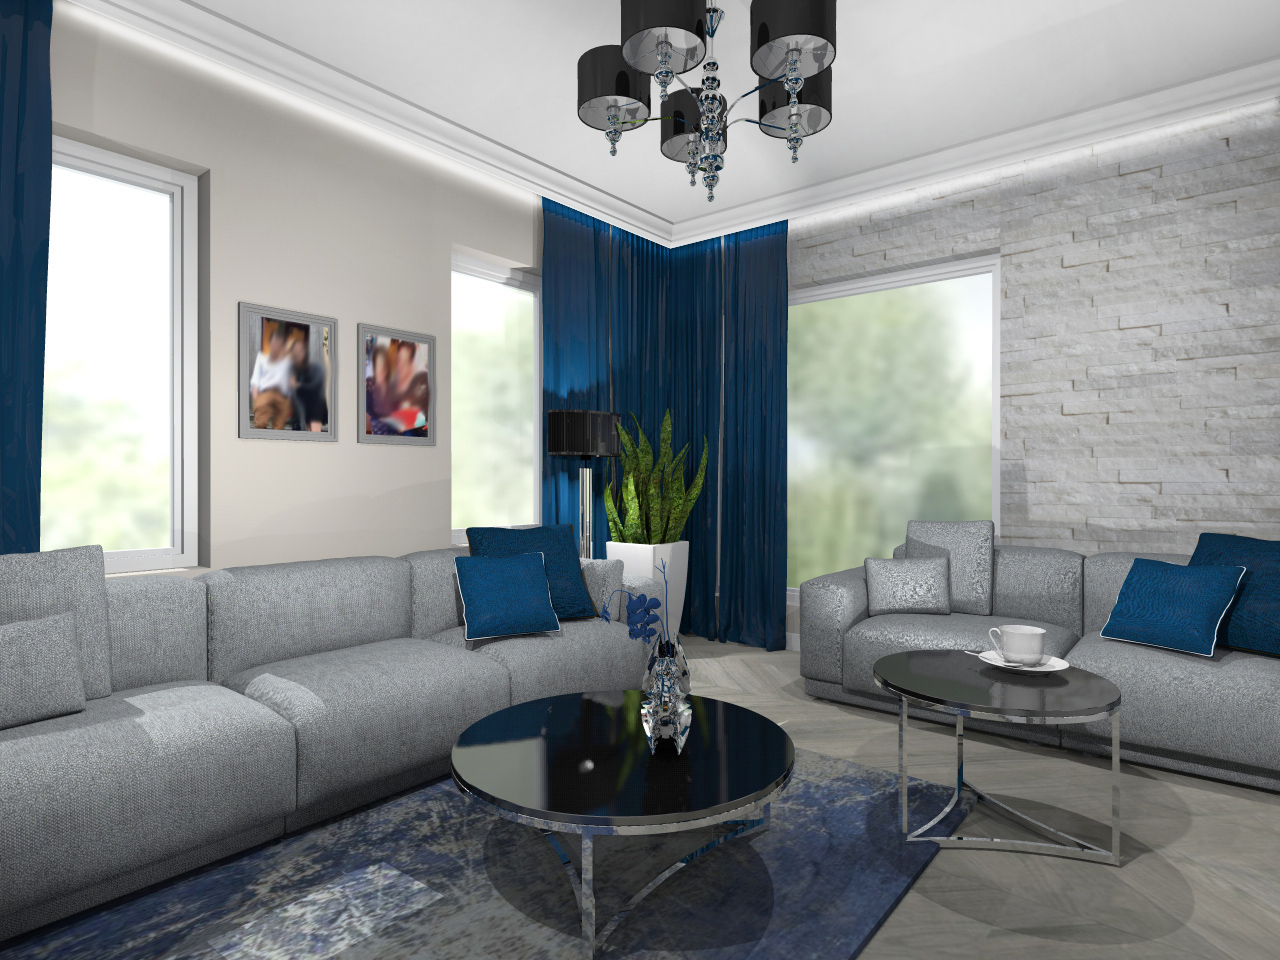 Living Room and Kitchen Mallow 2019